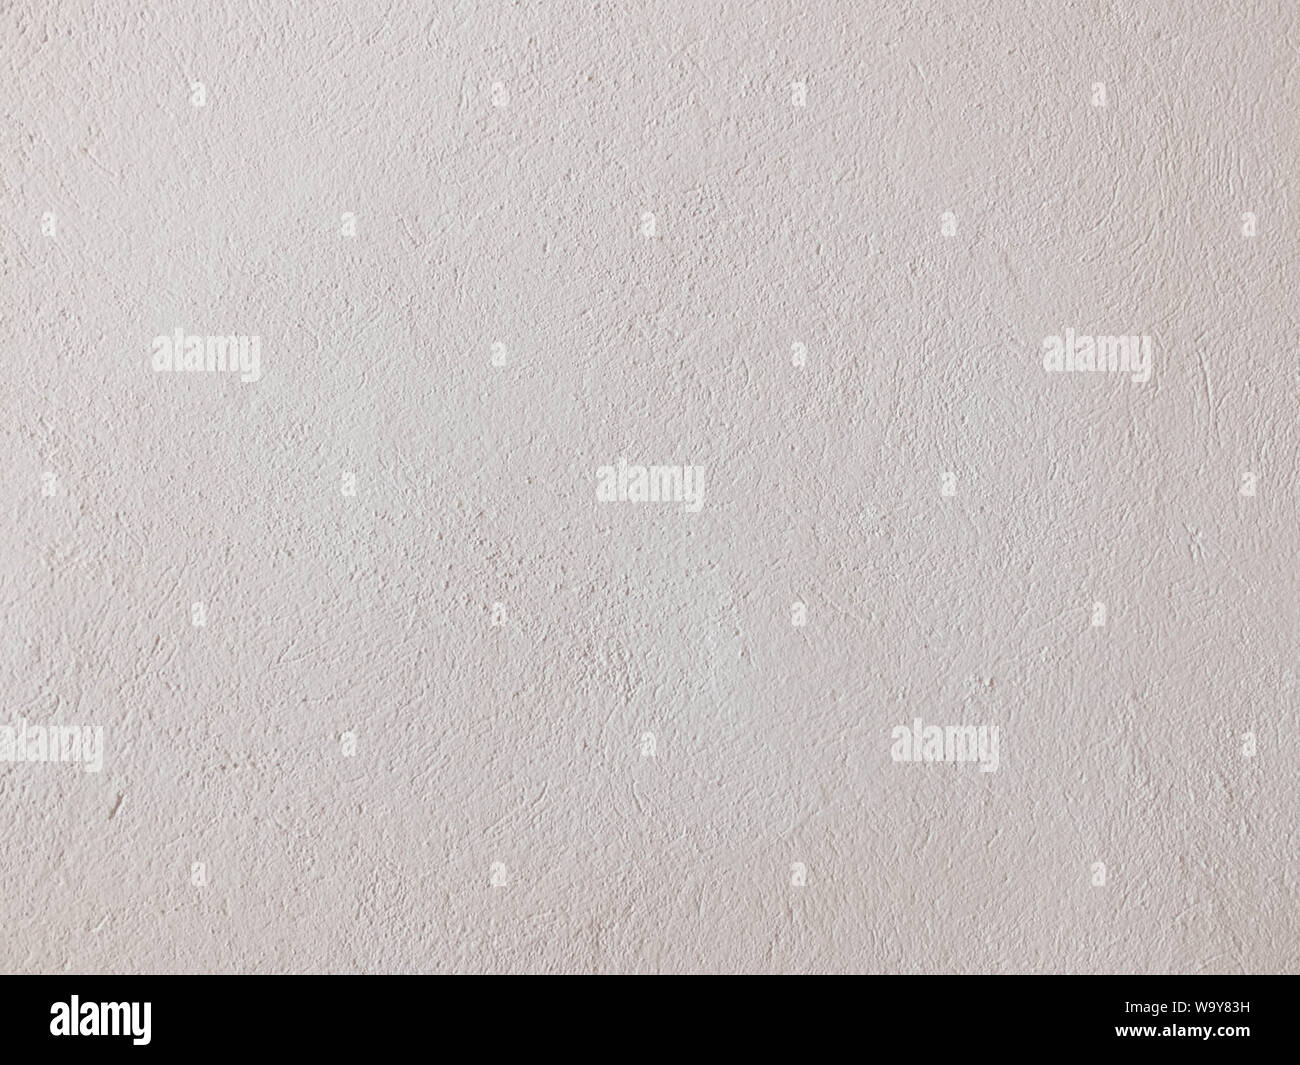 White Plaster Seamless Texture Background High Resolution Stock Photography And Images Alamy